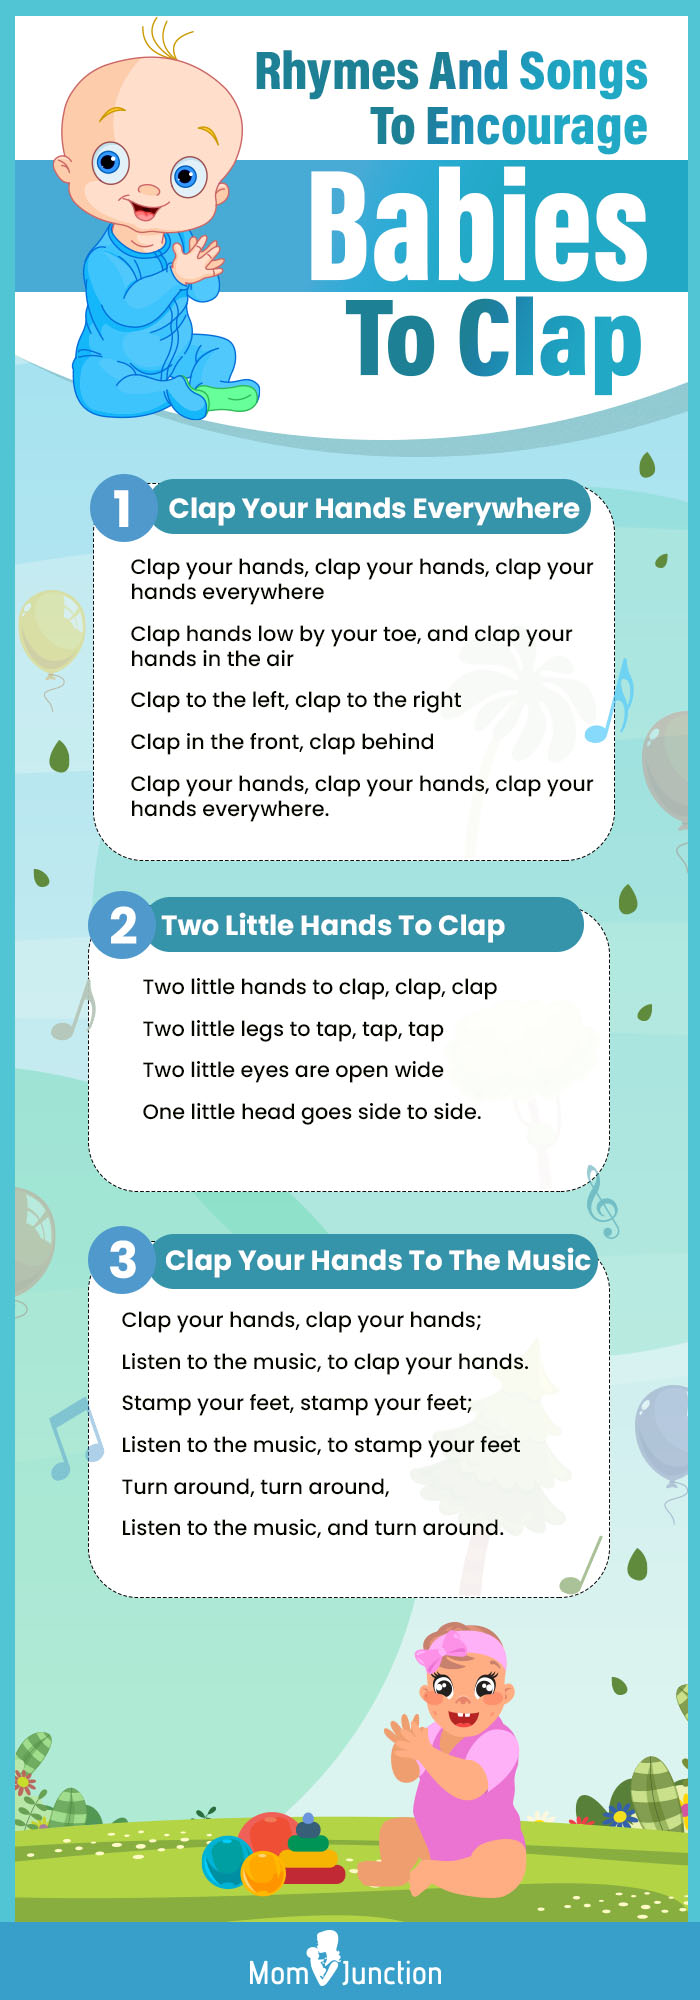 rhymes and songs to encourage babies to clap (infographic)